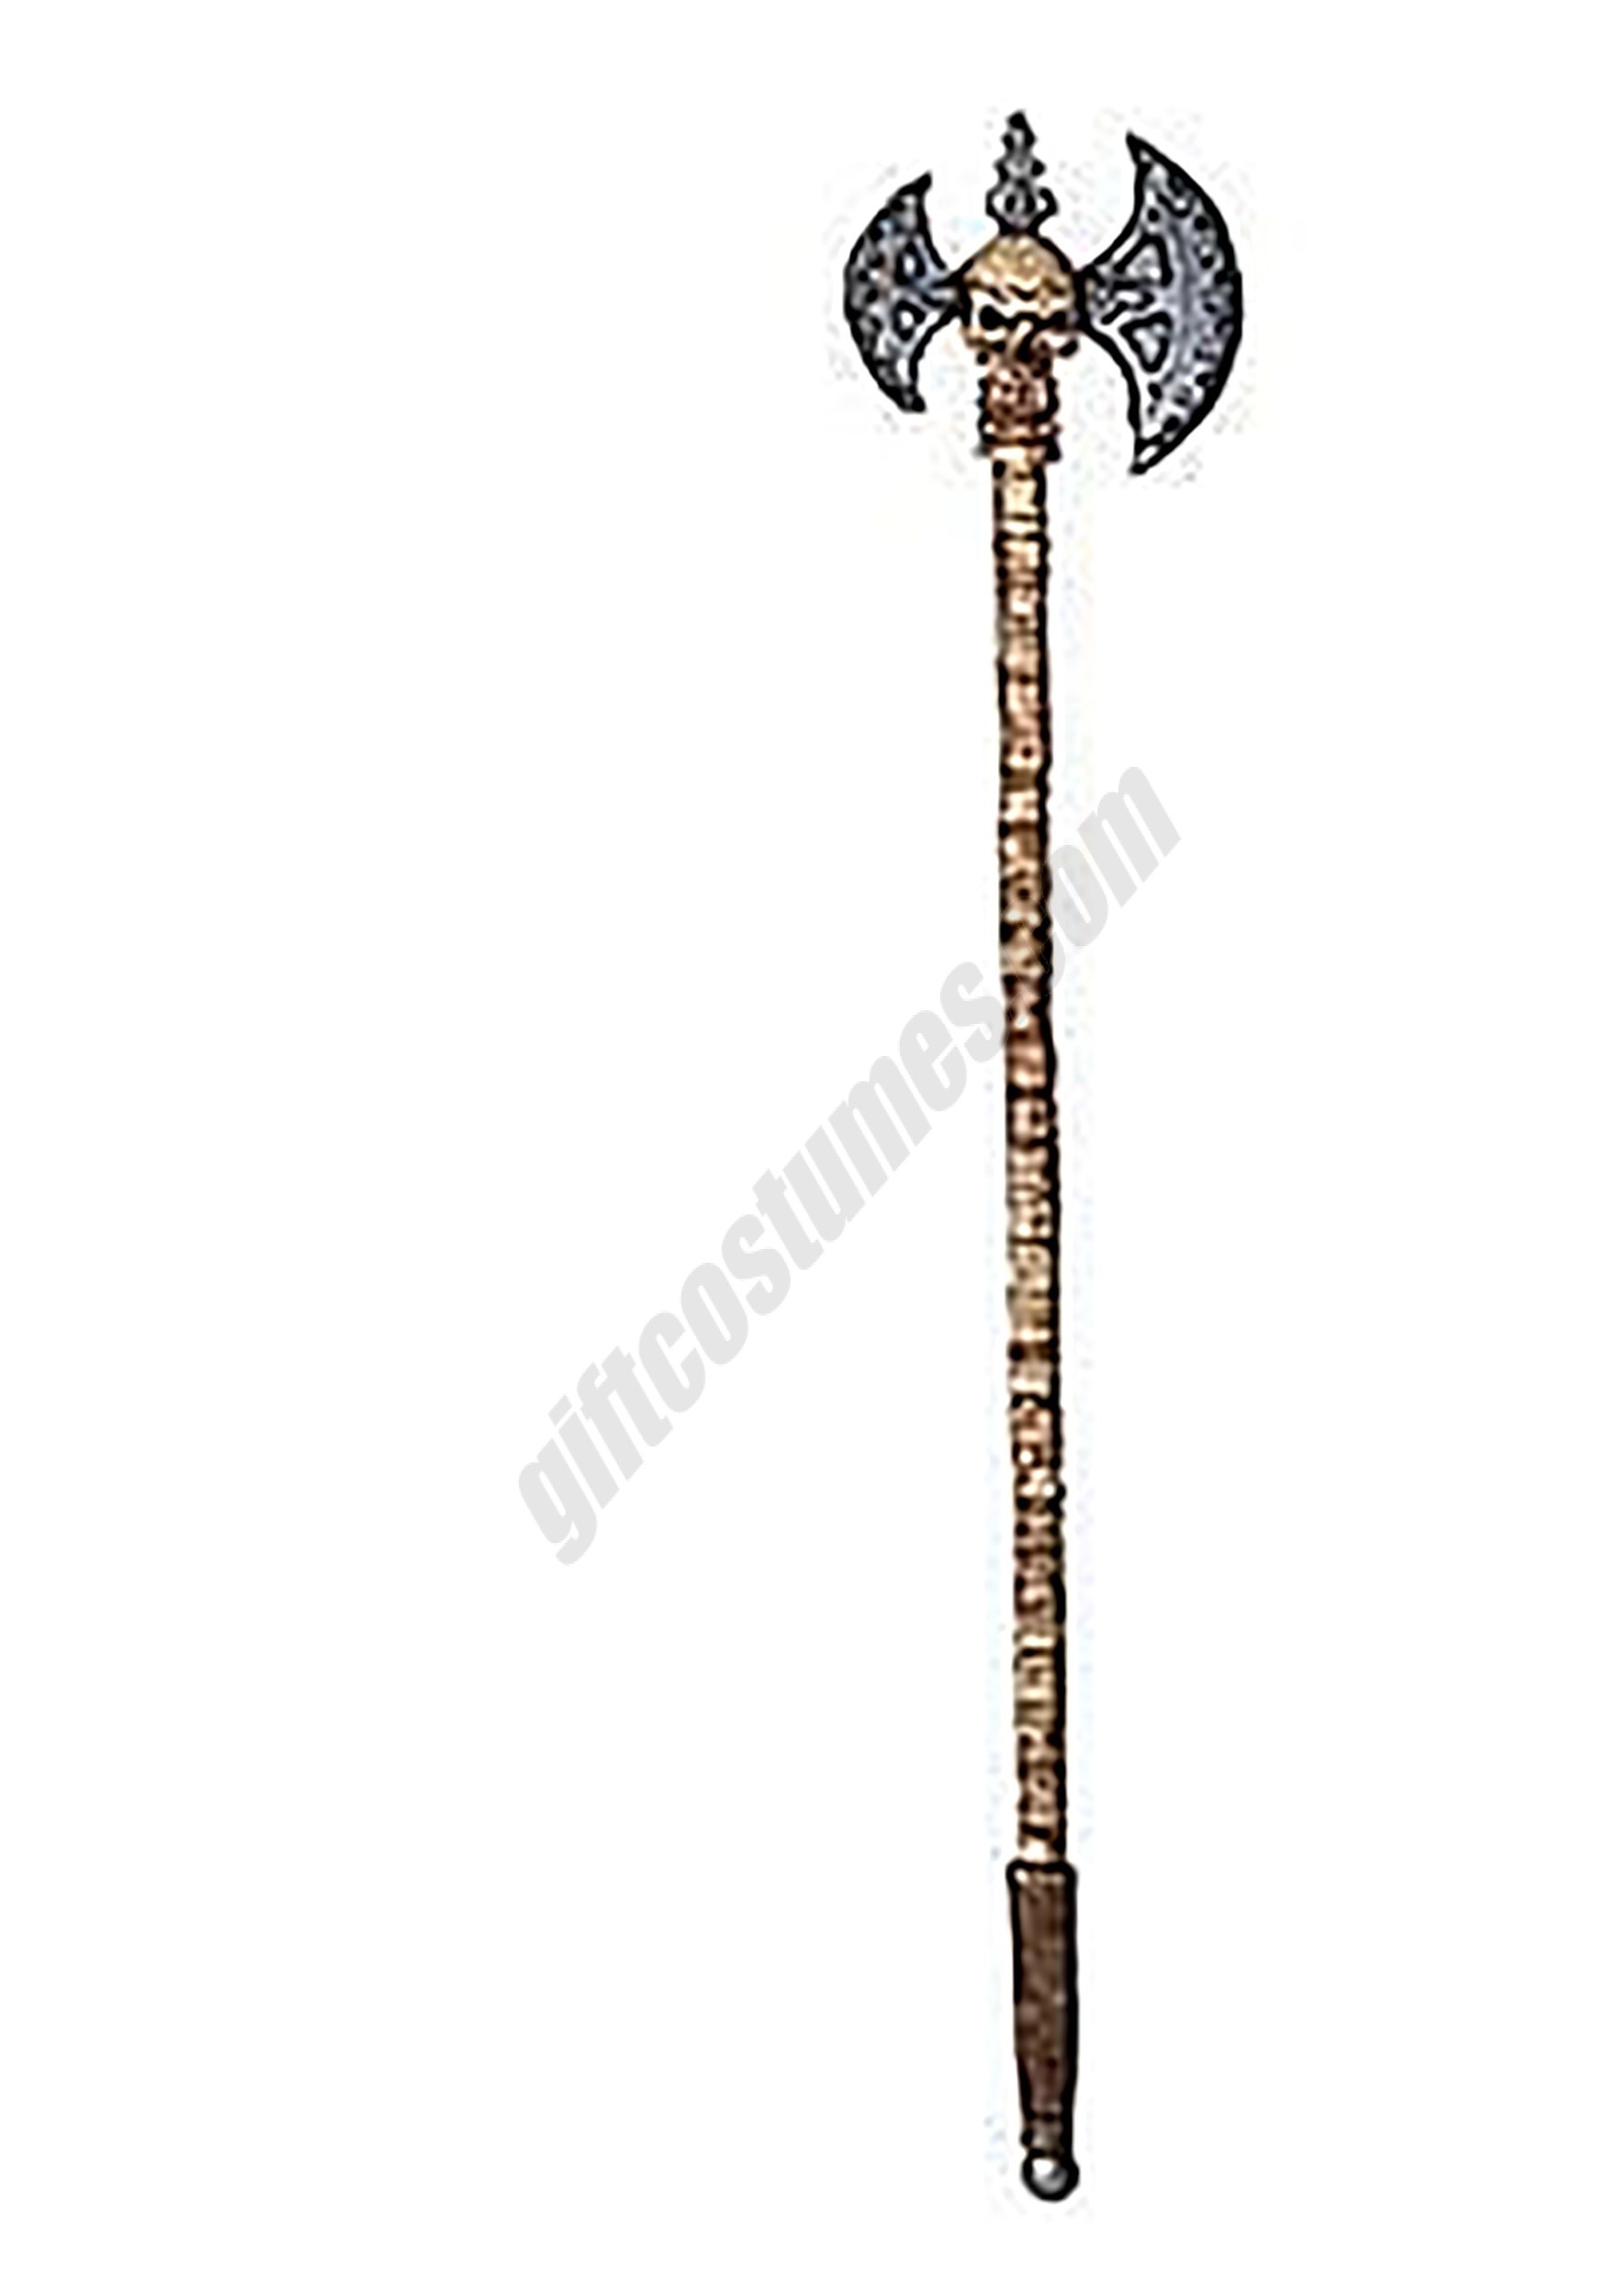 Skull Staff Axe 57" Prop Promotions - Skull Staff Axe 57" Prop Promotions